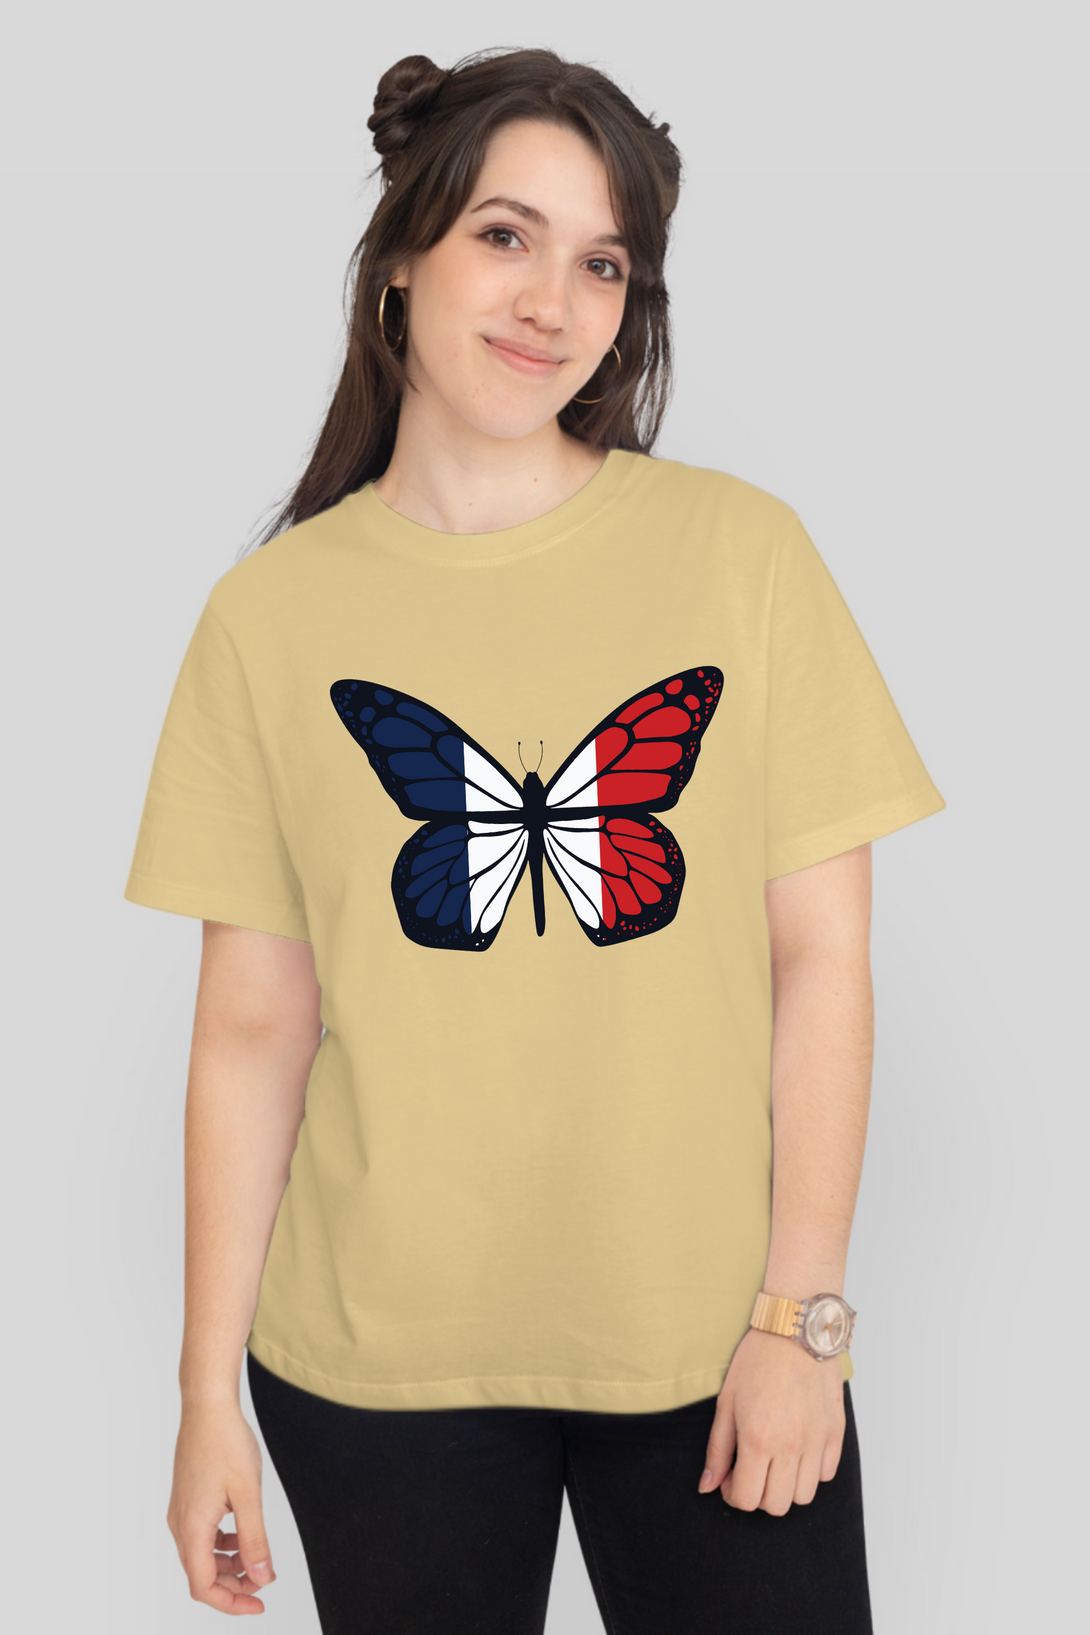 French Butterfly Printed T-Shirt For Women - WowWaves - 11